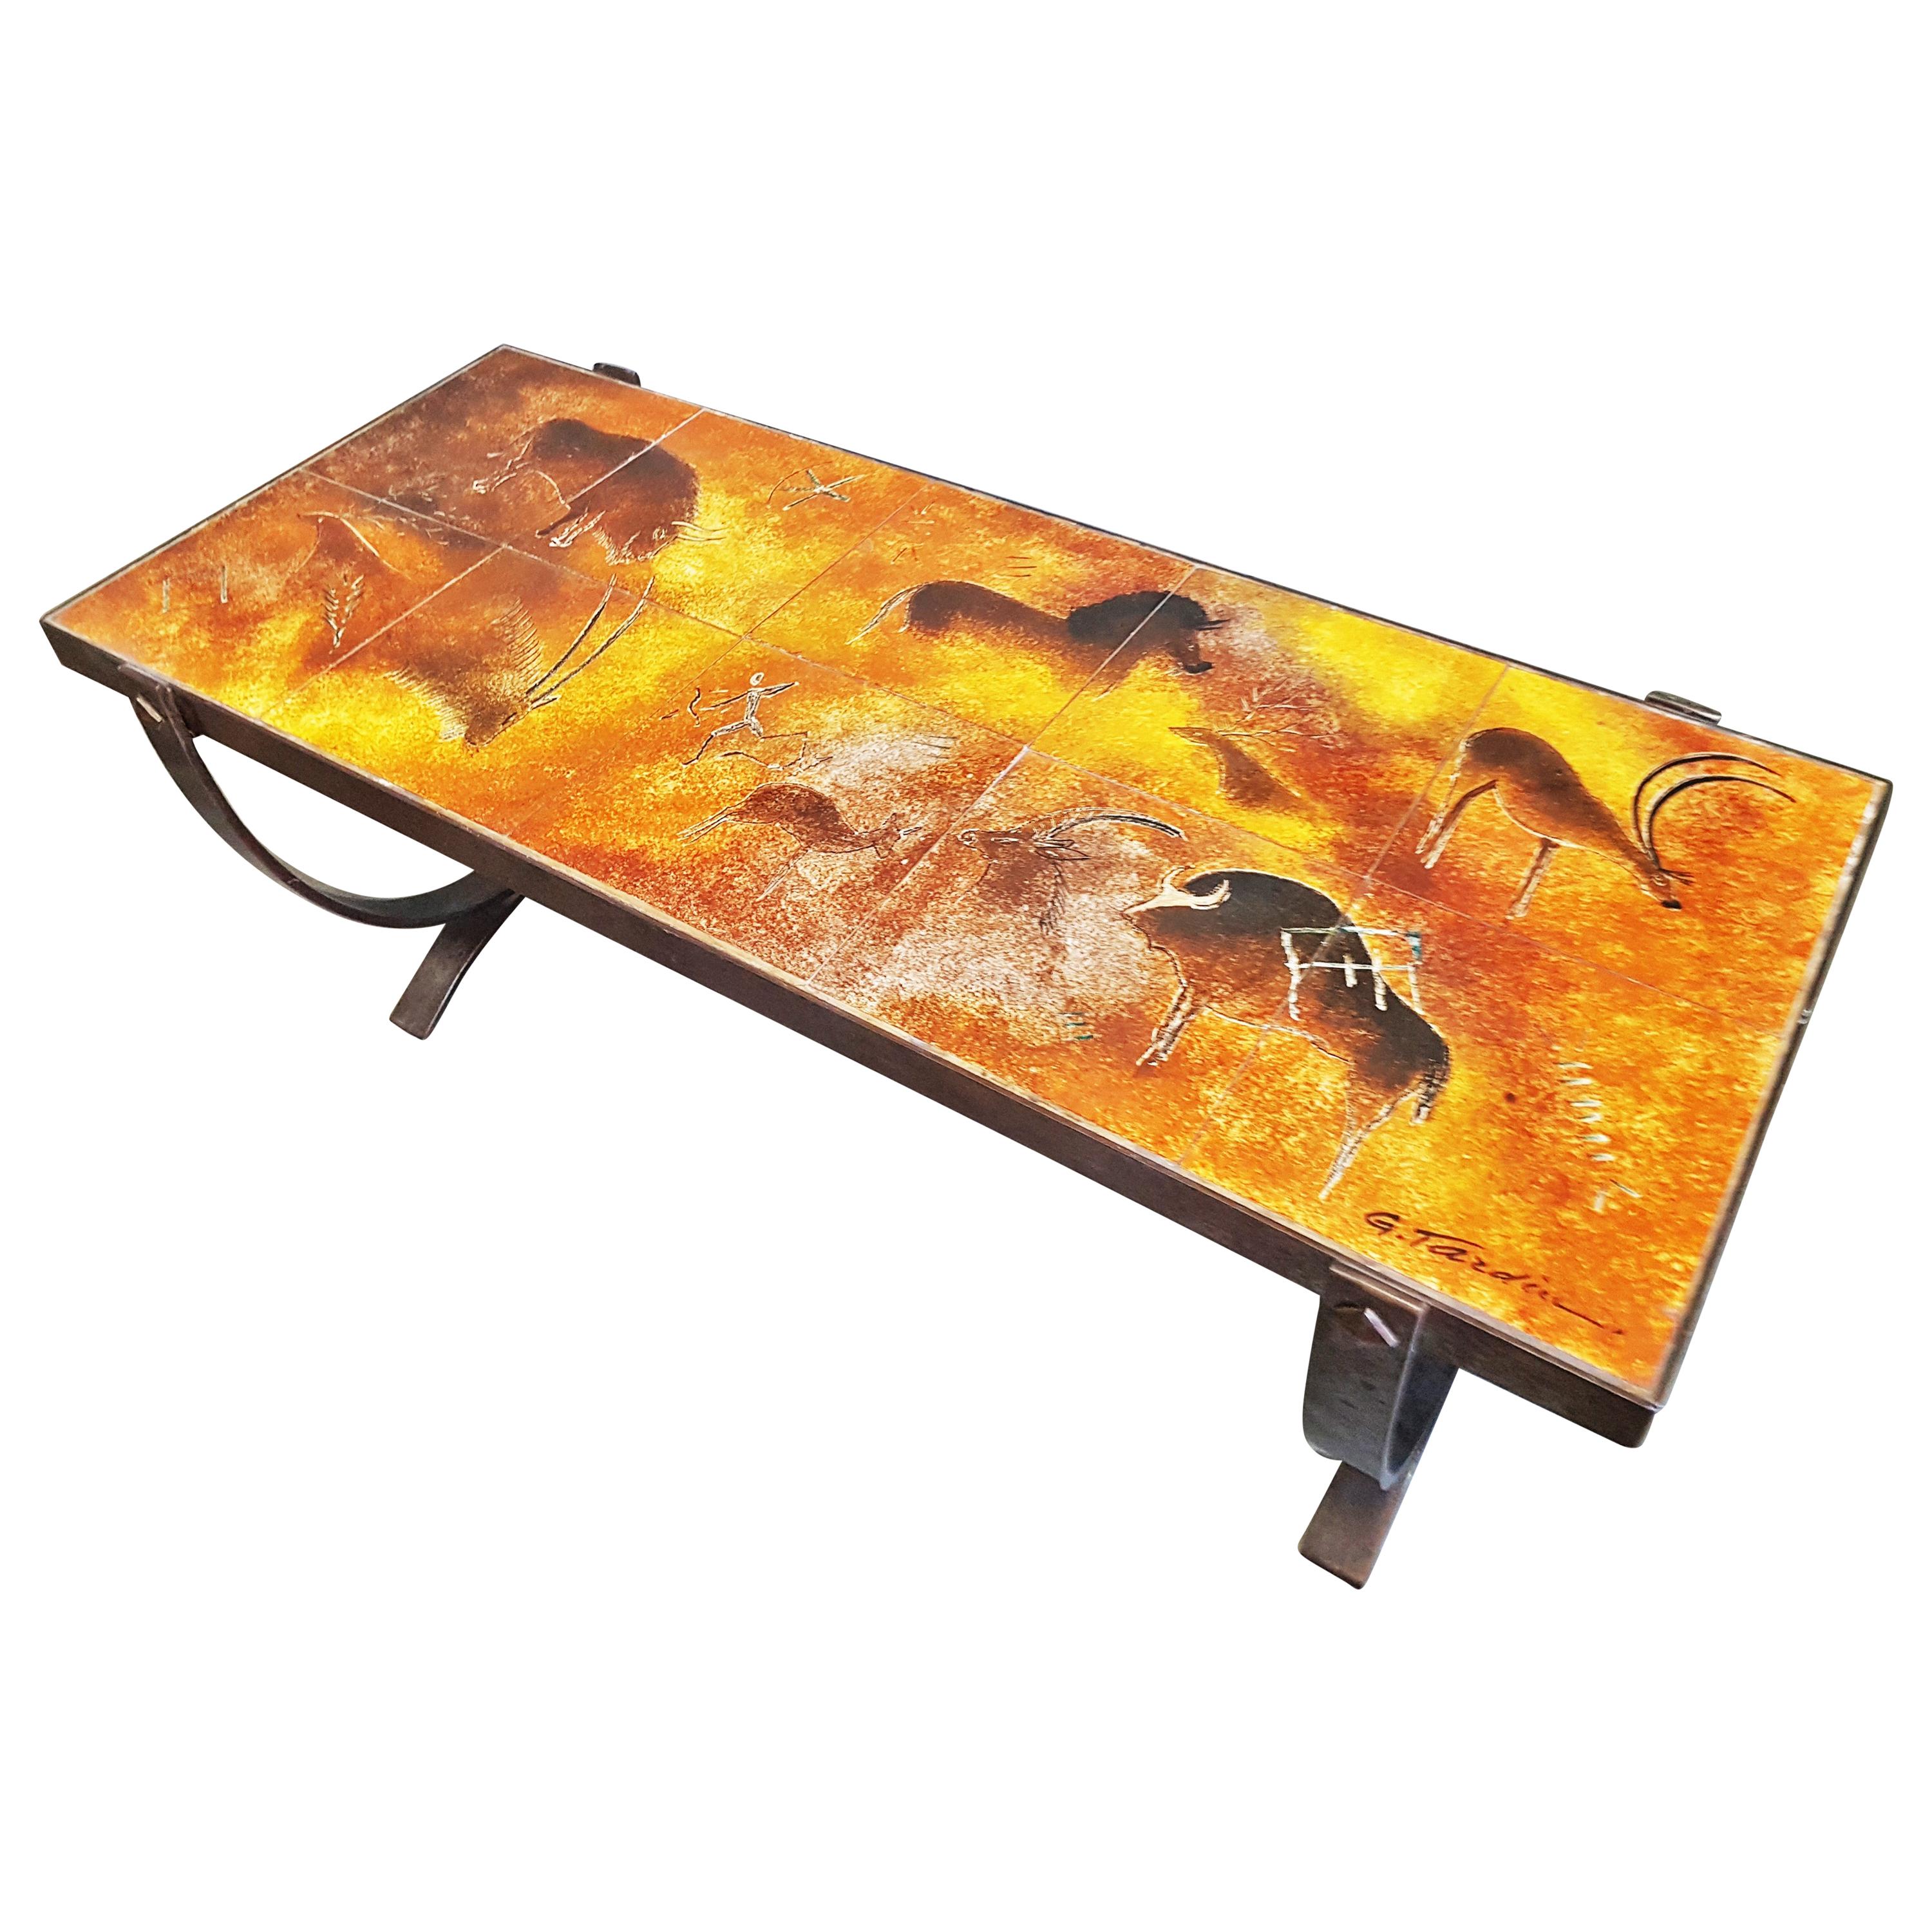 Midcentury Coffee Table by Georges Tardieu, Vallauris, France, 1960s